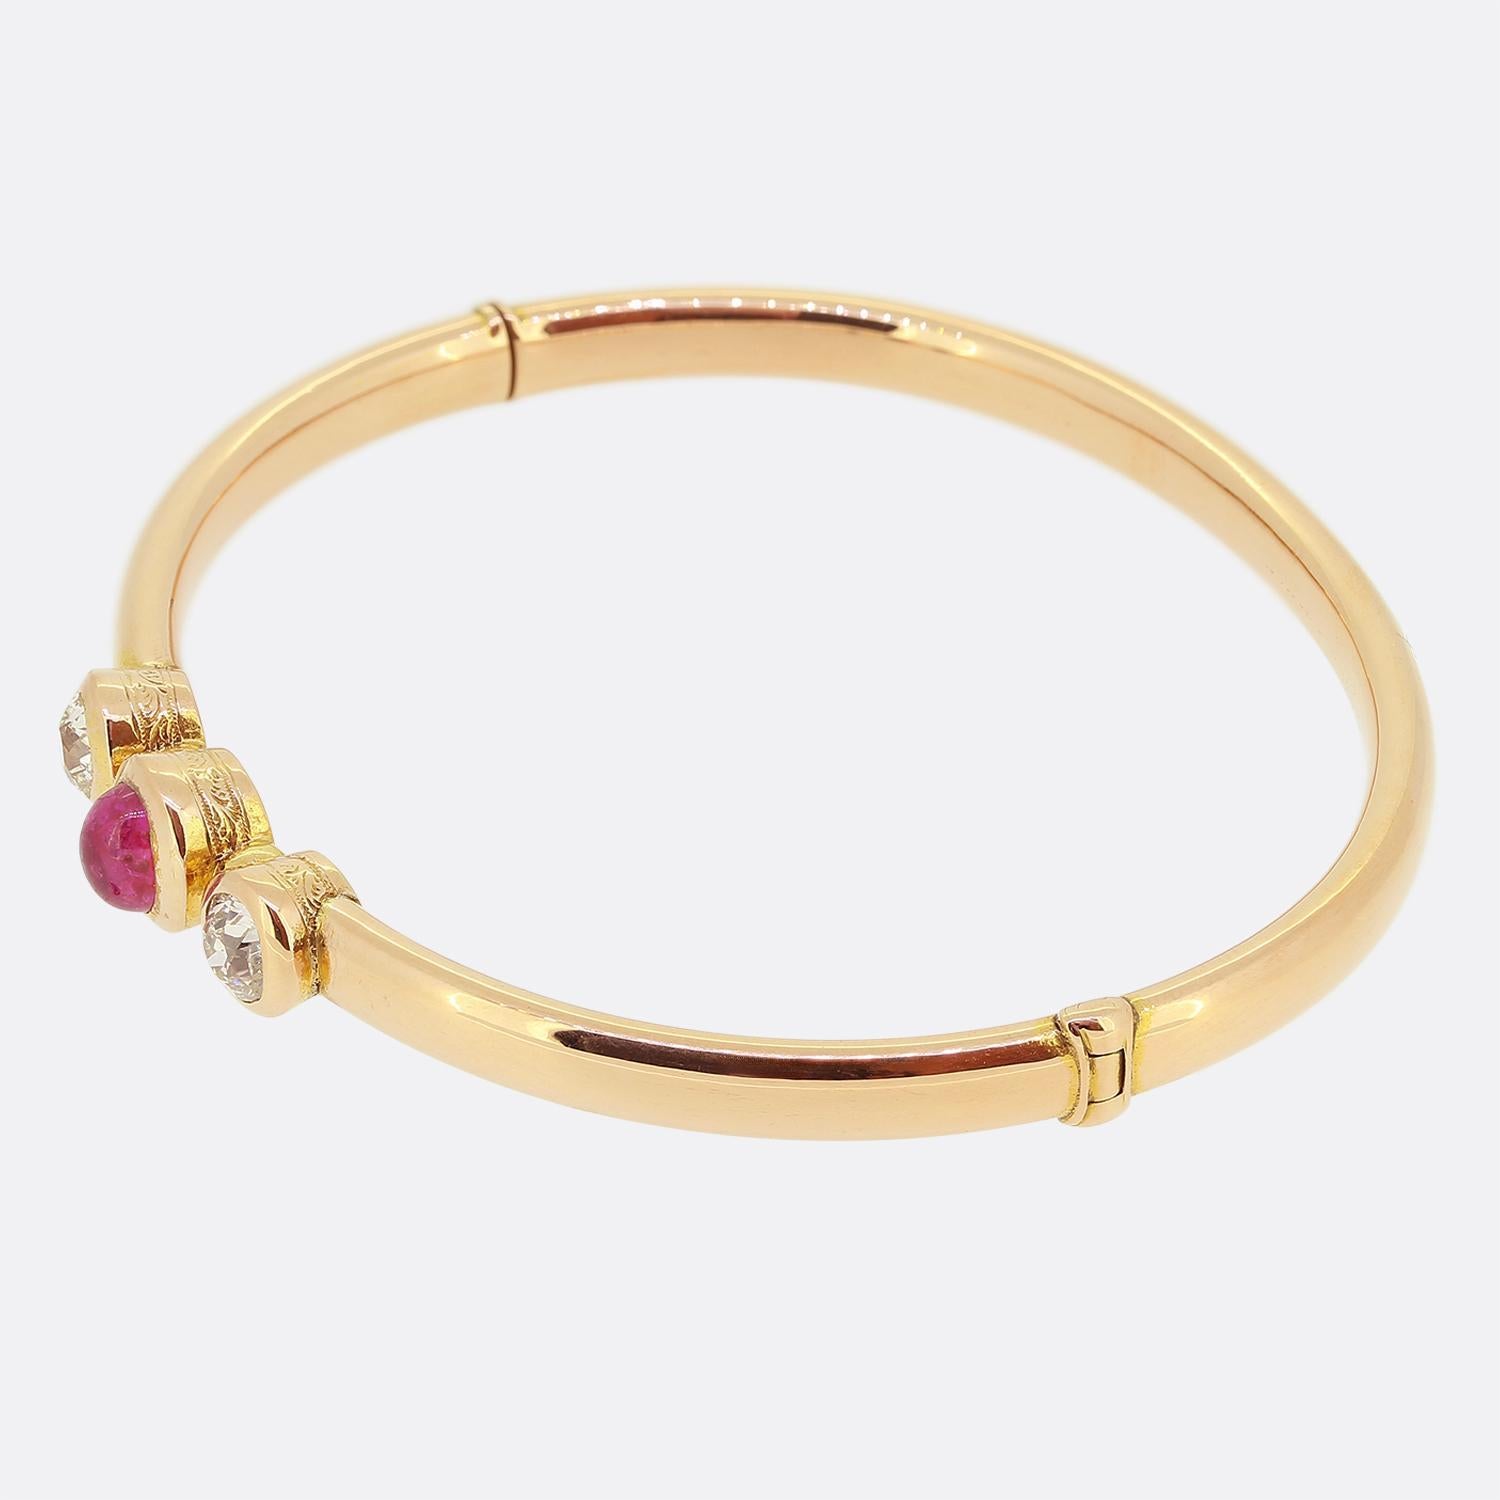 Here we have a stylish bangle taken dating back to the Victorian era. This antique piece has been crafted from 18ct rose gold with a plain polished band playing host to a trio of precious gemstones at the face. At the centre we find a single